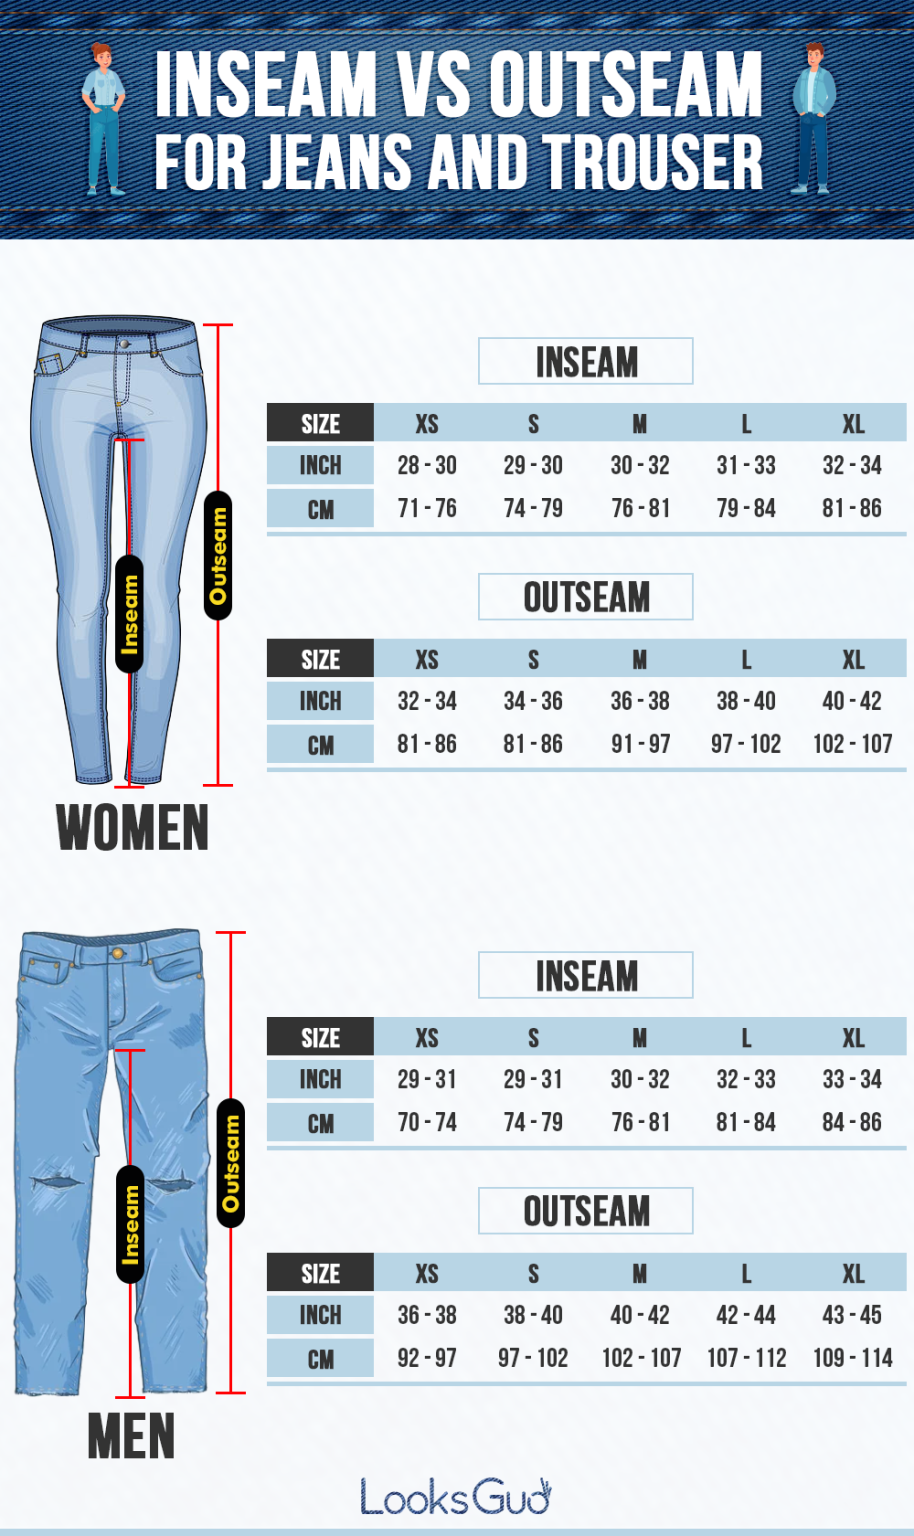 Inseam Vs Outseam For Jeans And Trousers 914x1536 